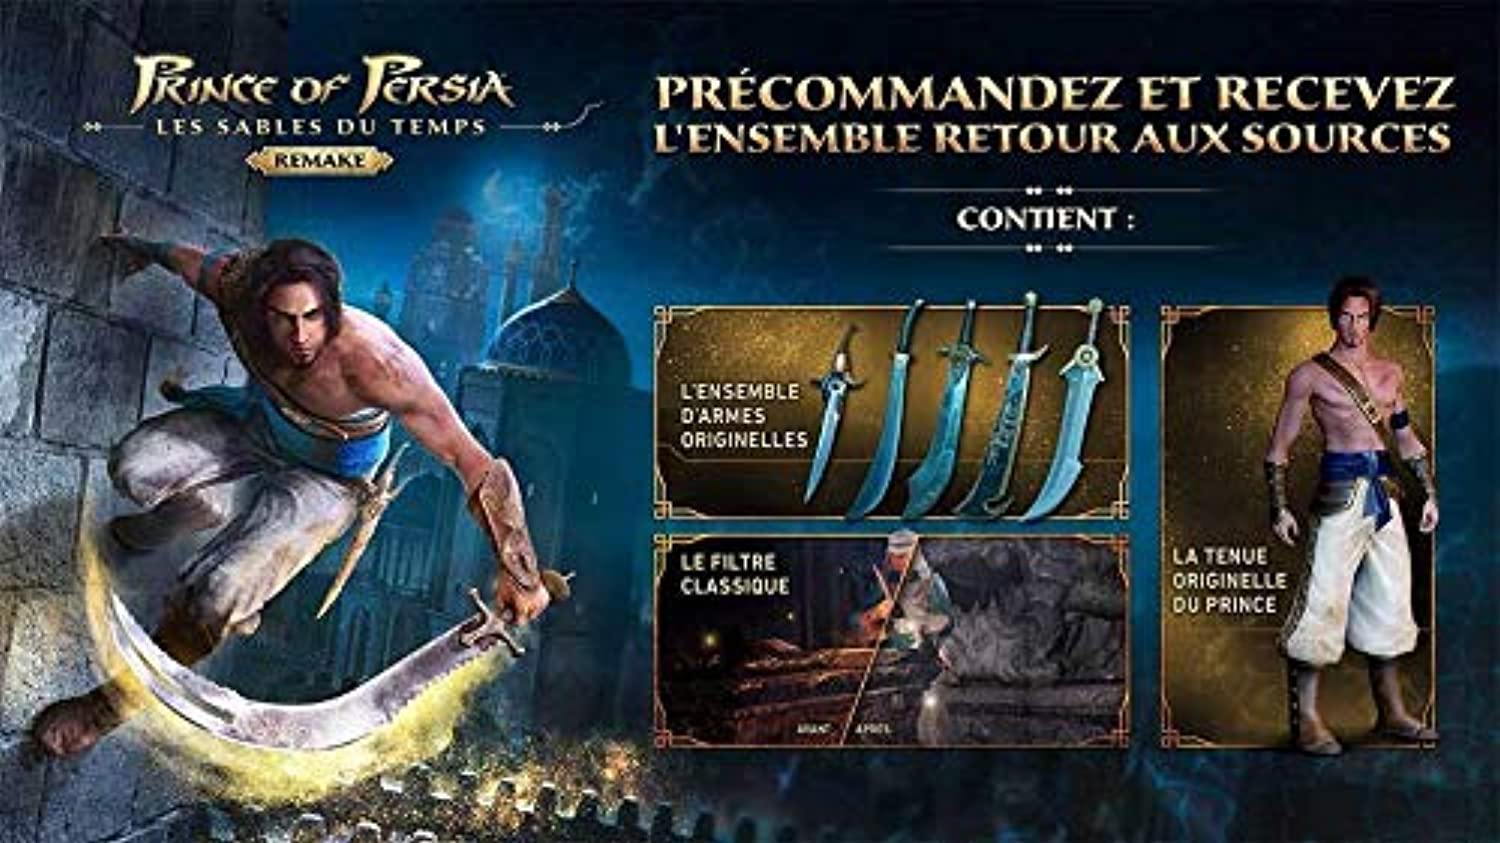 Prince of Persia: The Sands of Time Remake (PS4) - Offer Games